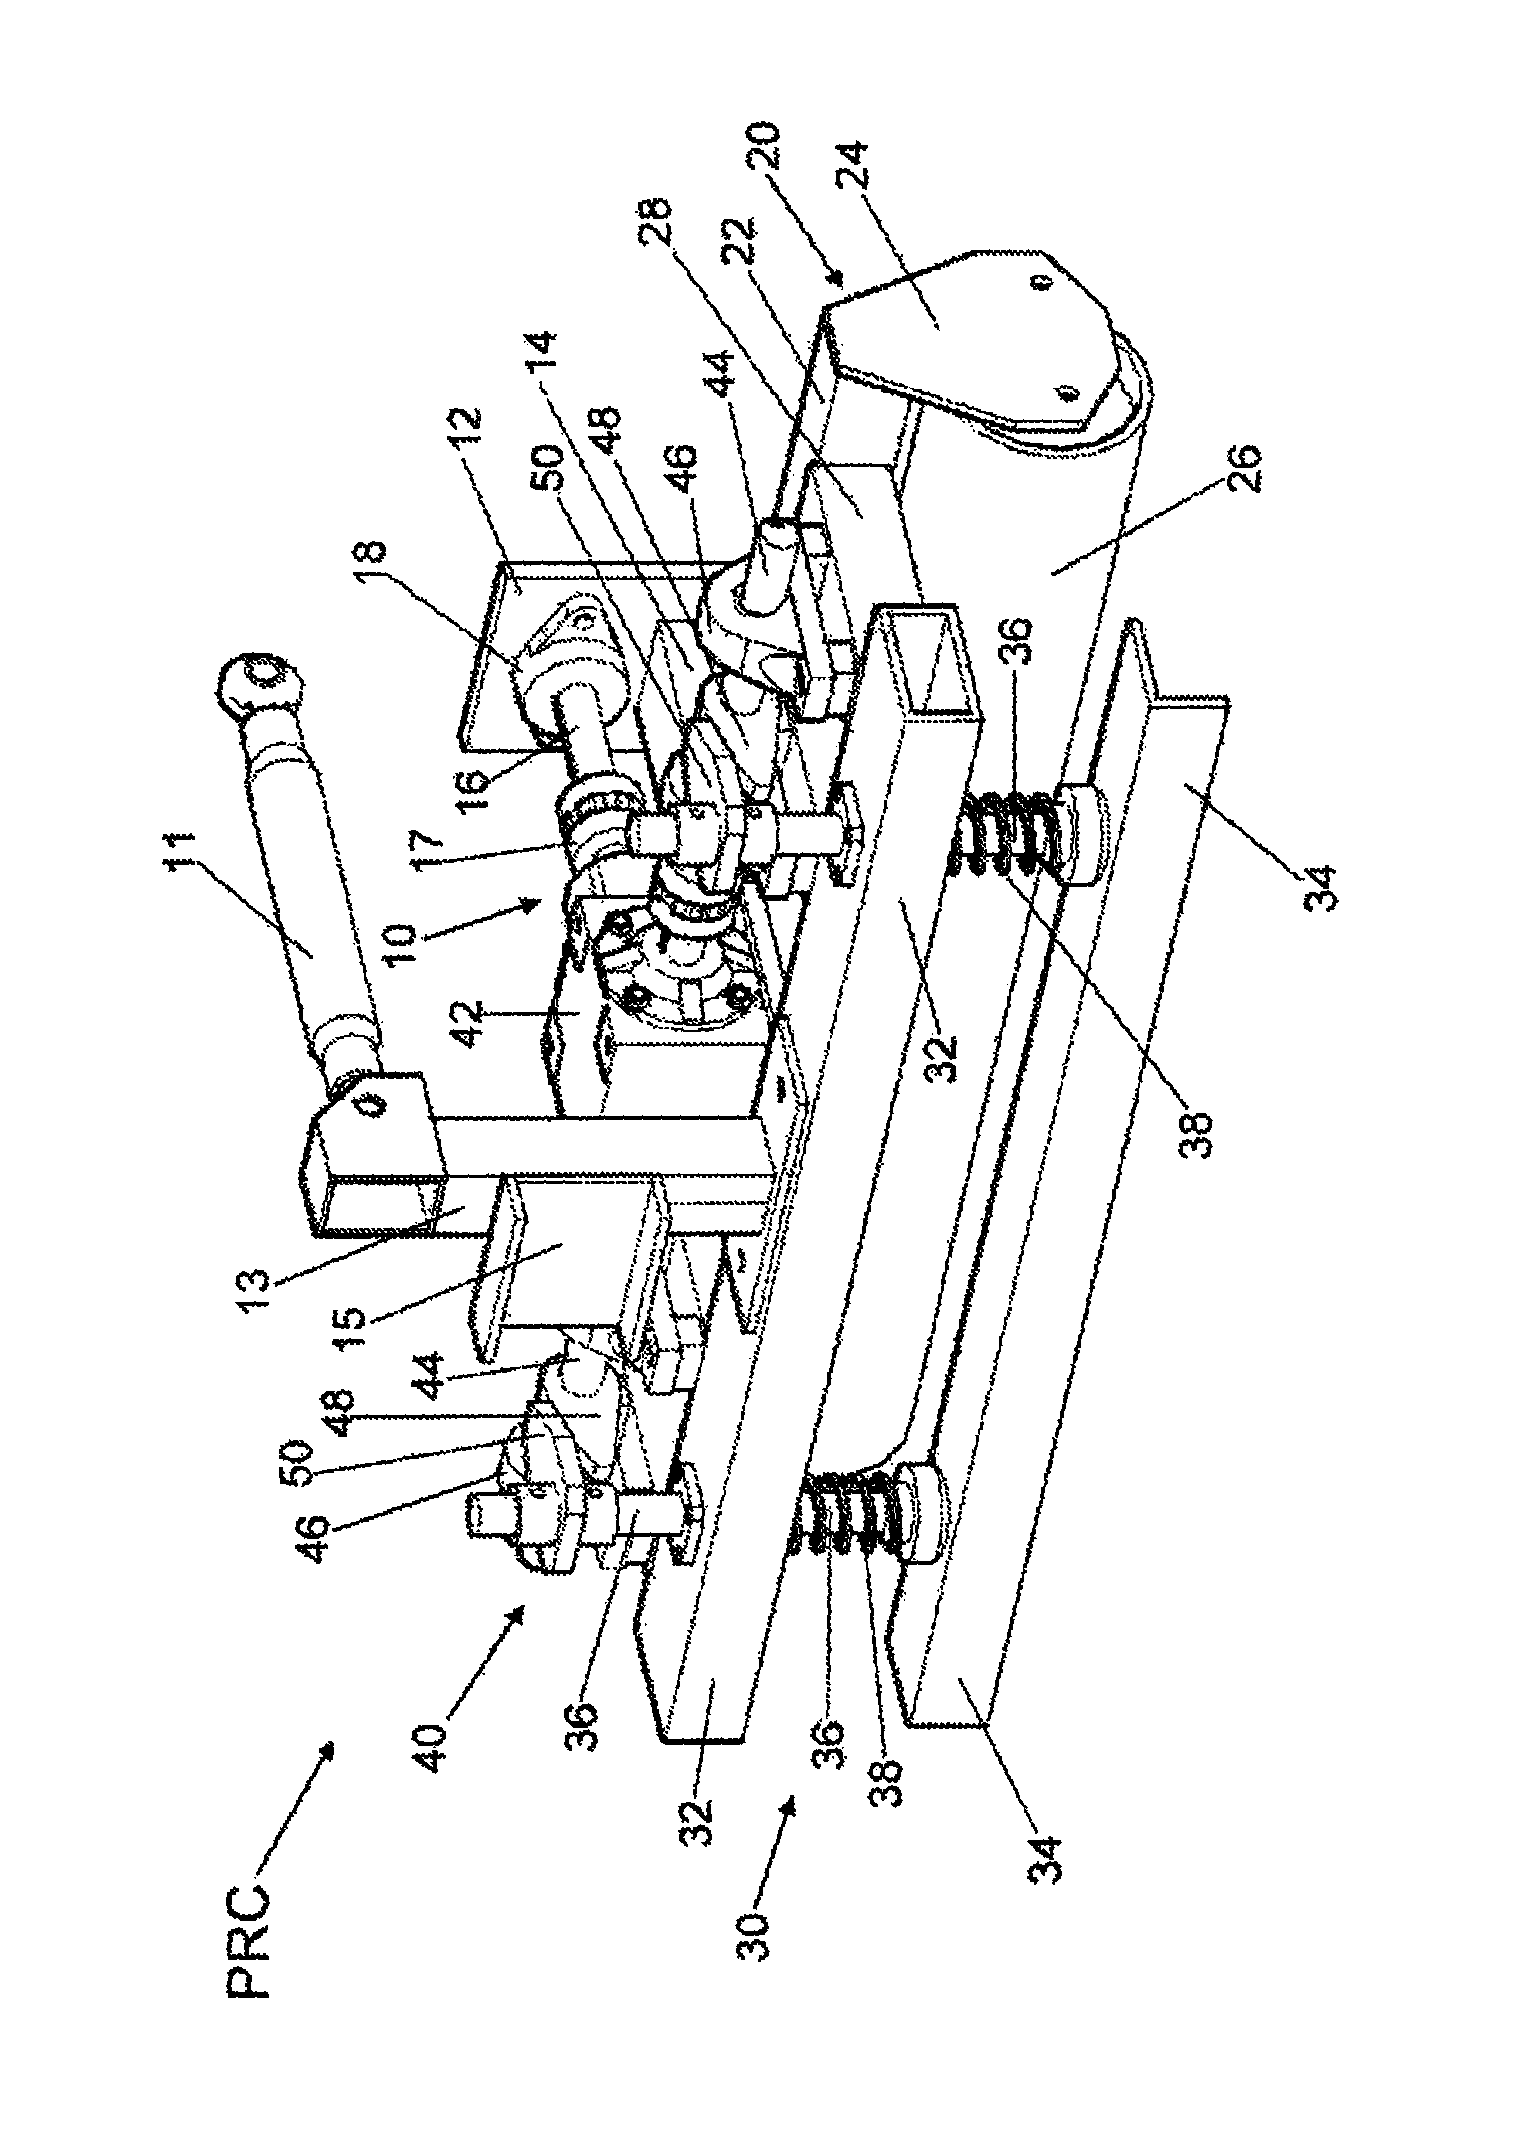 Powered rolling and crimping device for crop termination